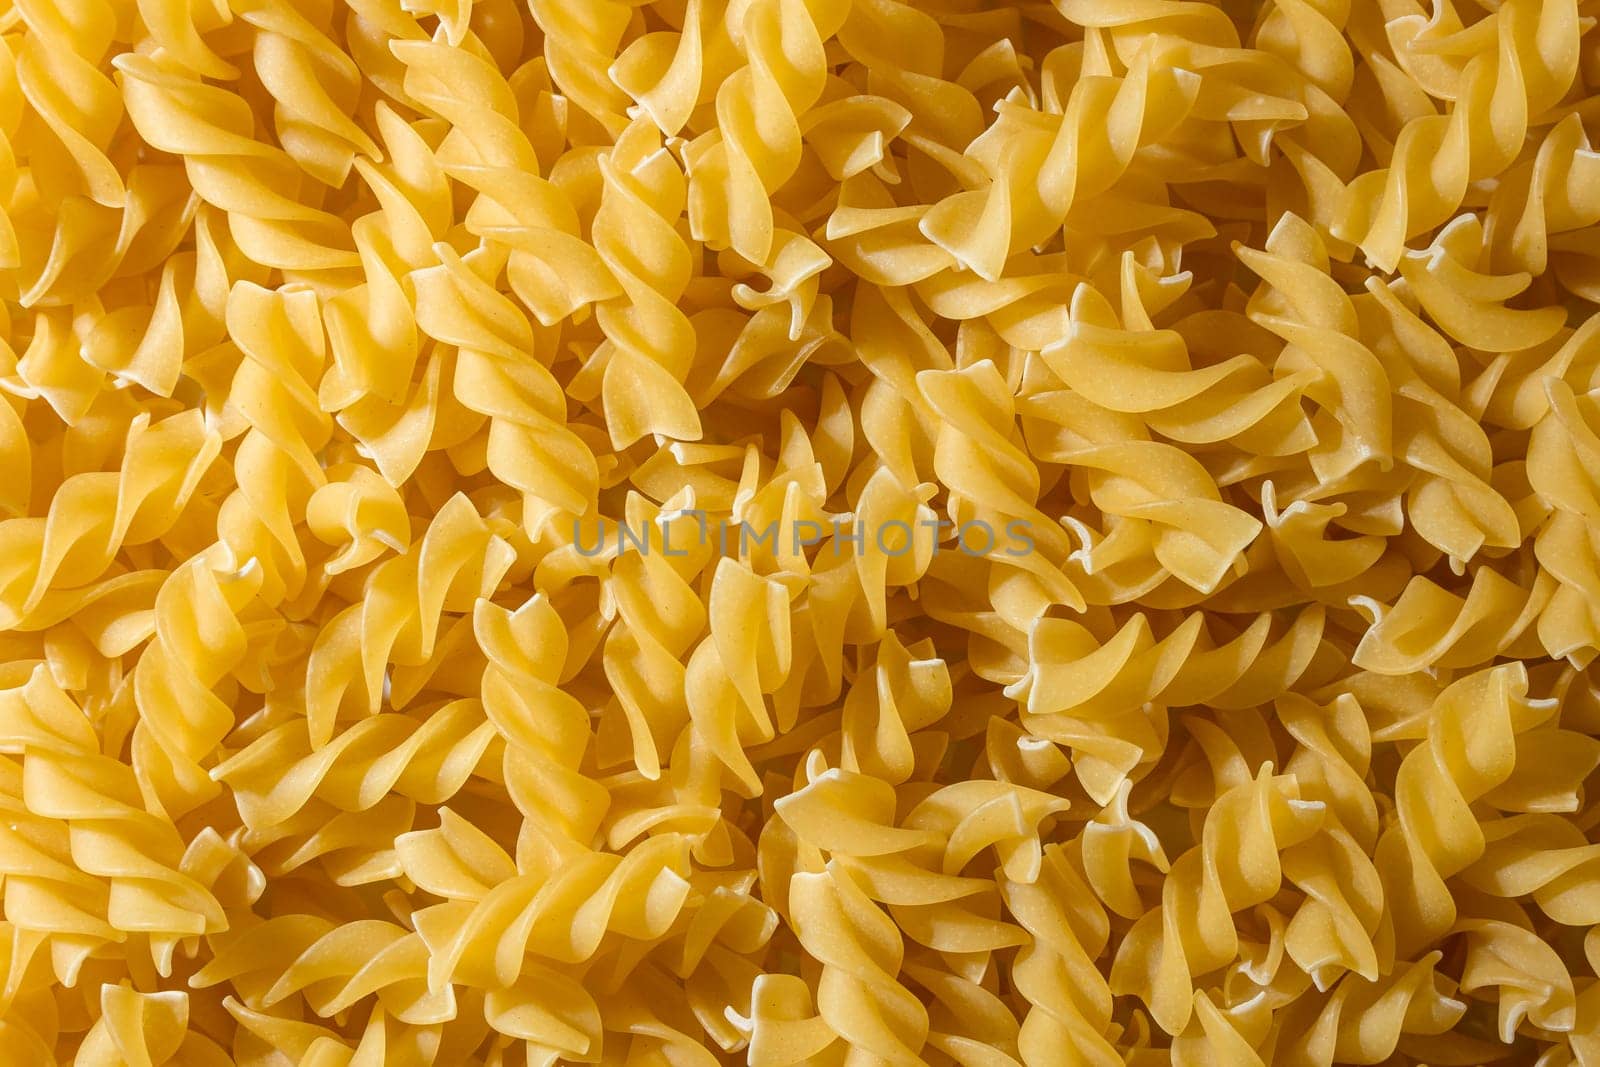 Uncooked Fusilli Pasta: A Culinary Canvas of Spiral Macaroni, Creating a Lively and Textured Background for Gourmet Cooking. Dry Pasta. Raw Macaroni - Top View, Flat Lay